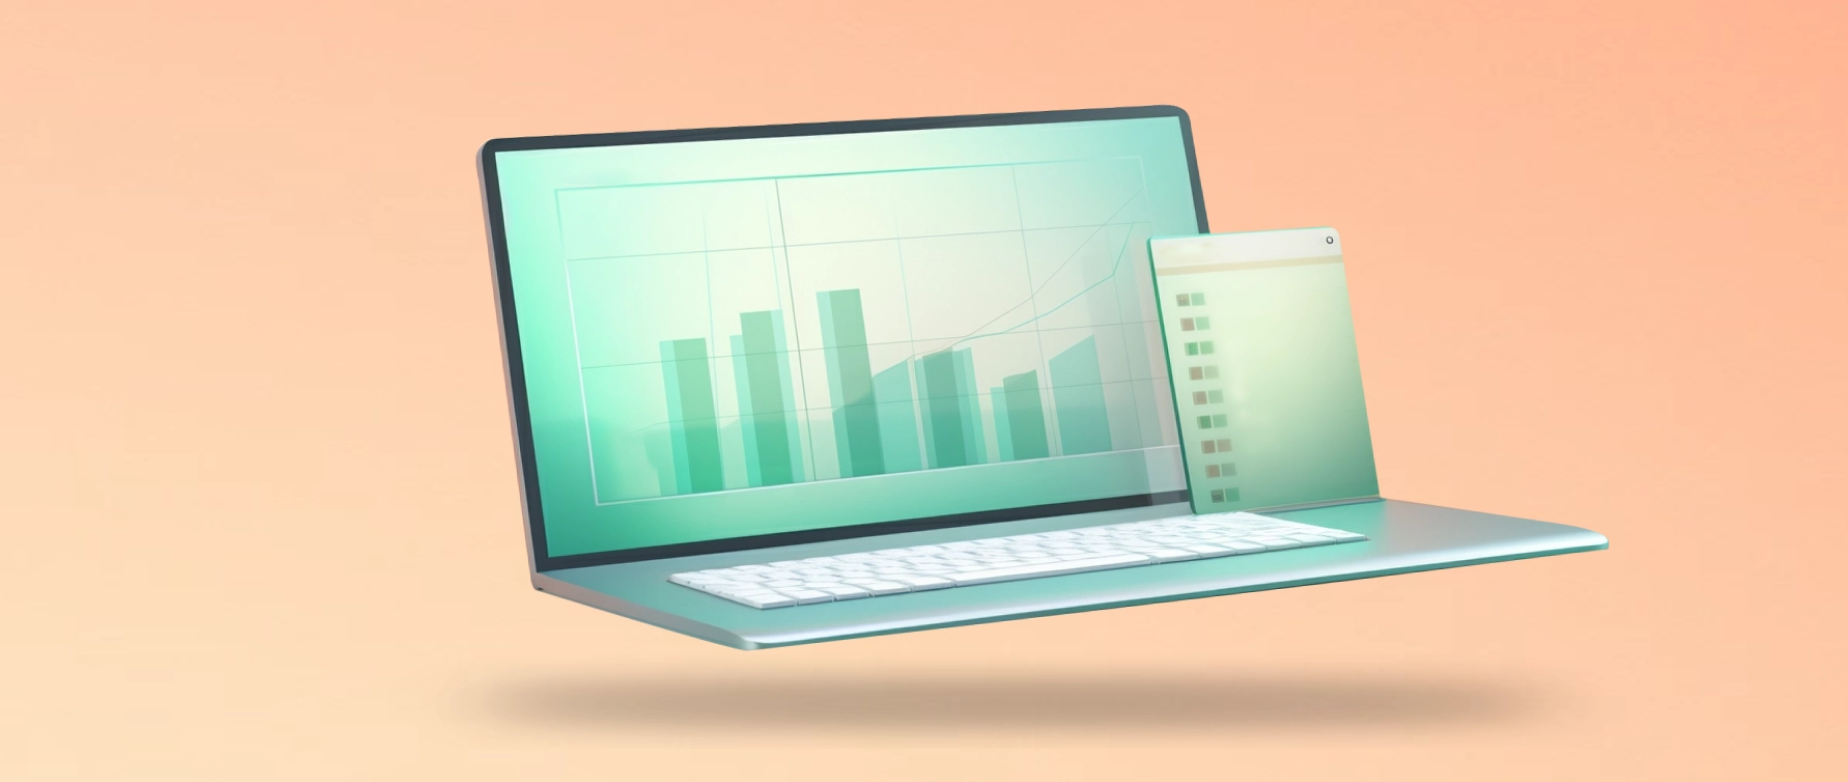 A laptop with graphs on its screen next to a tablet with graphics on a light orange background.